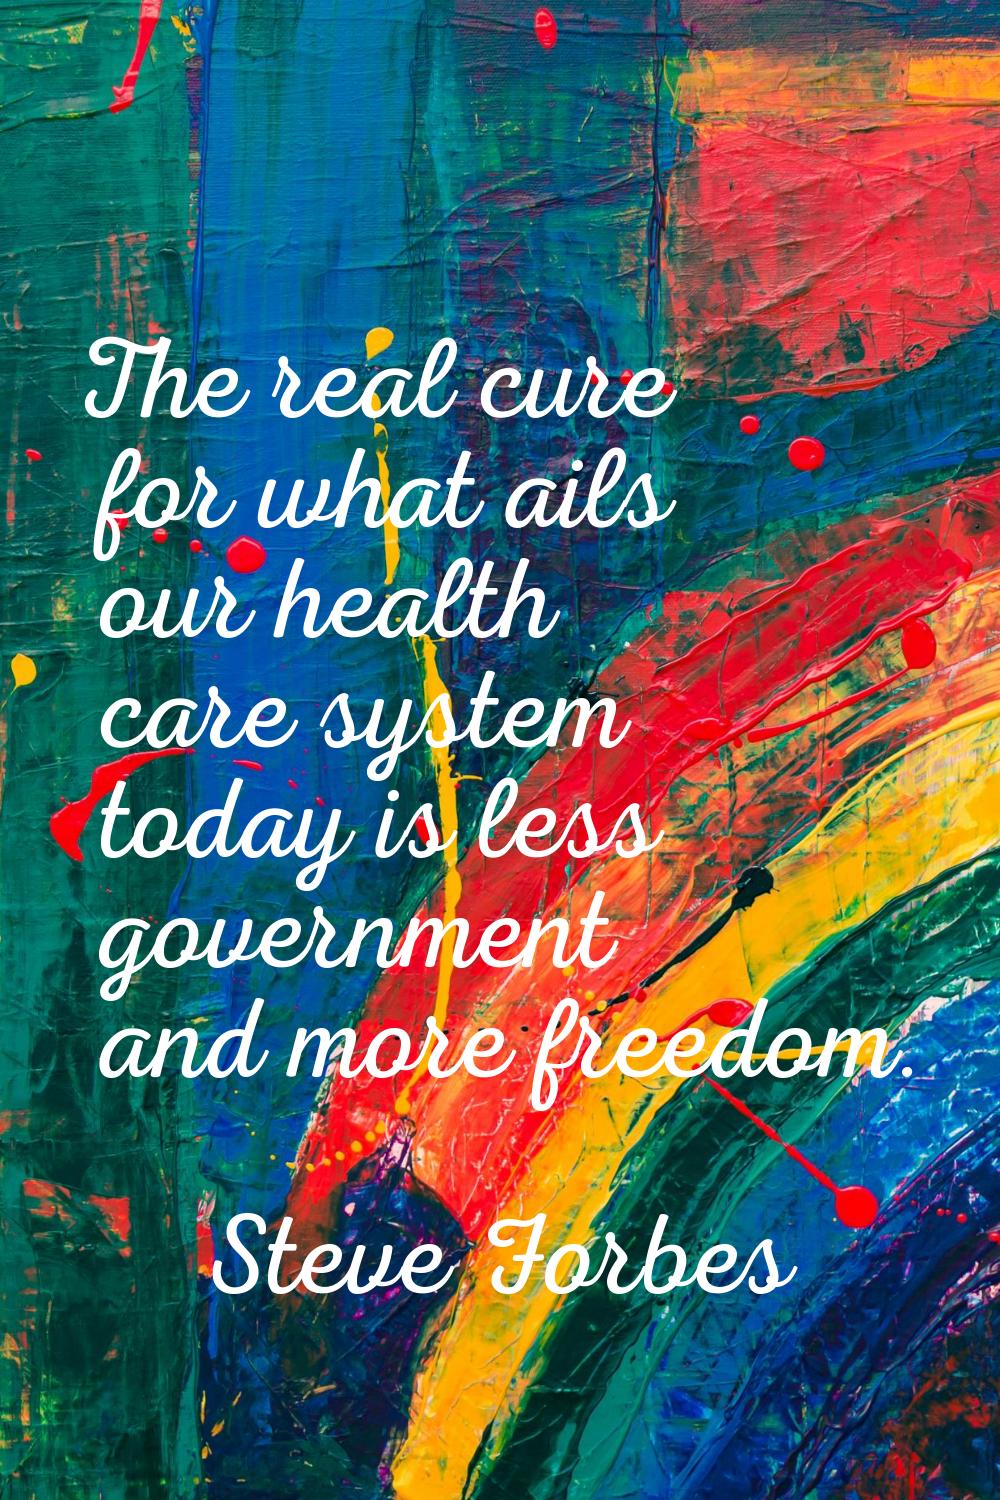 The real cure for what ails our health care system today is less government and more freedom.